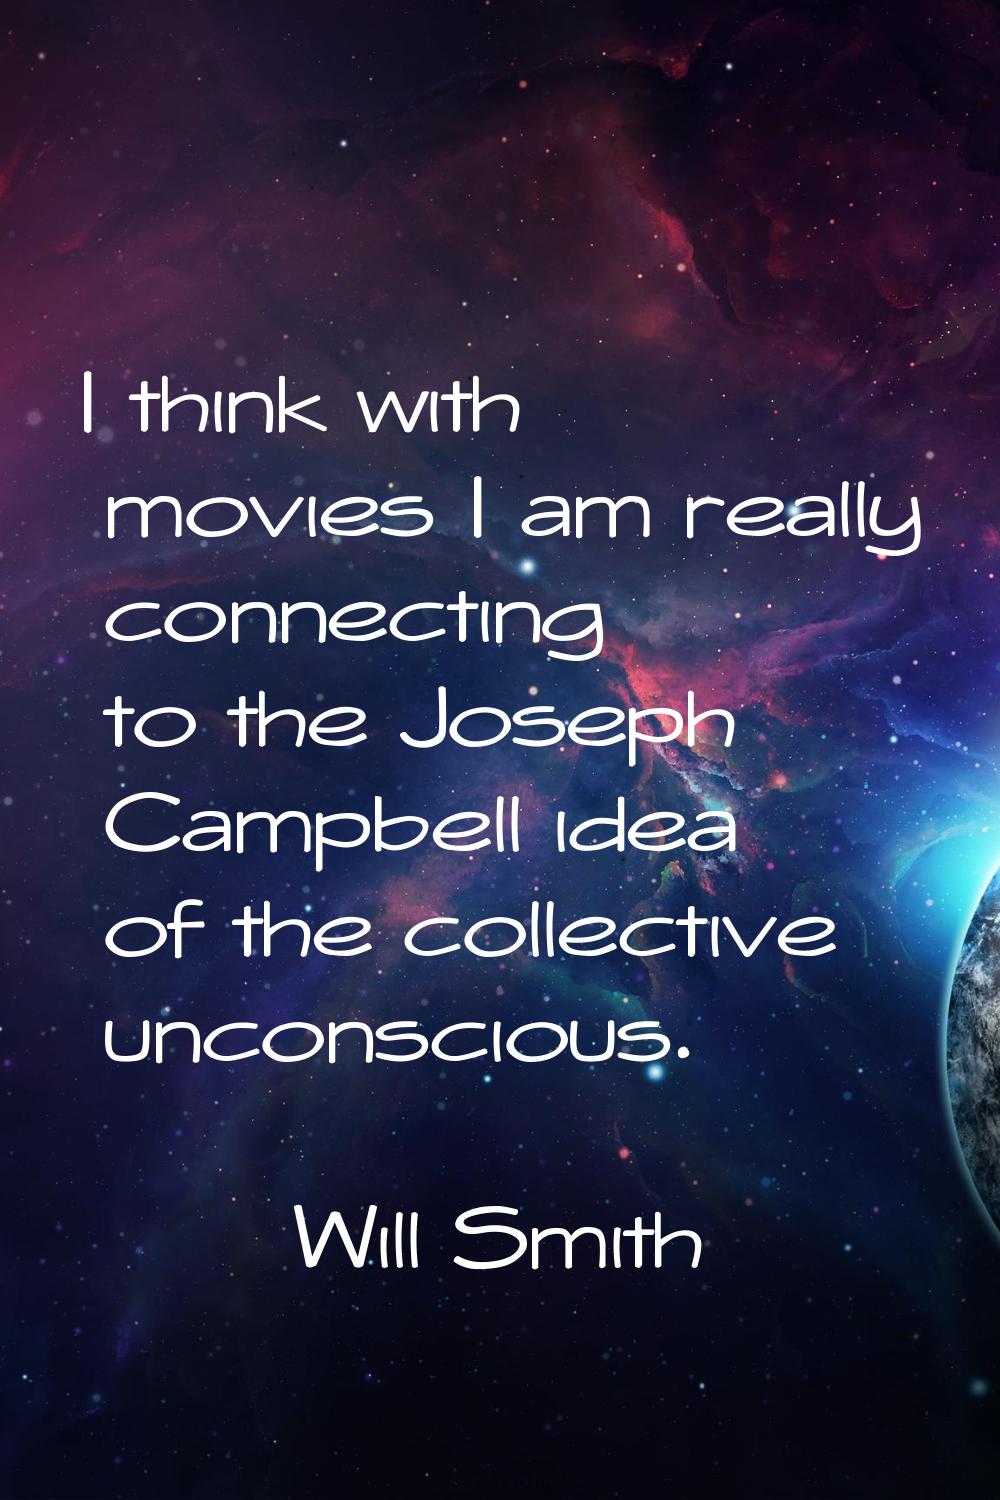 I think with movies I am really connecting to the Joseph Campbell idea of the collective unconsciou